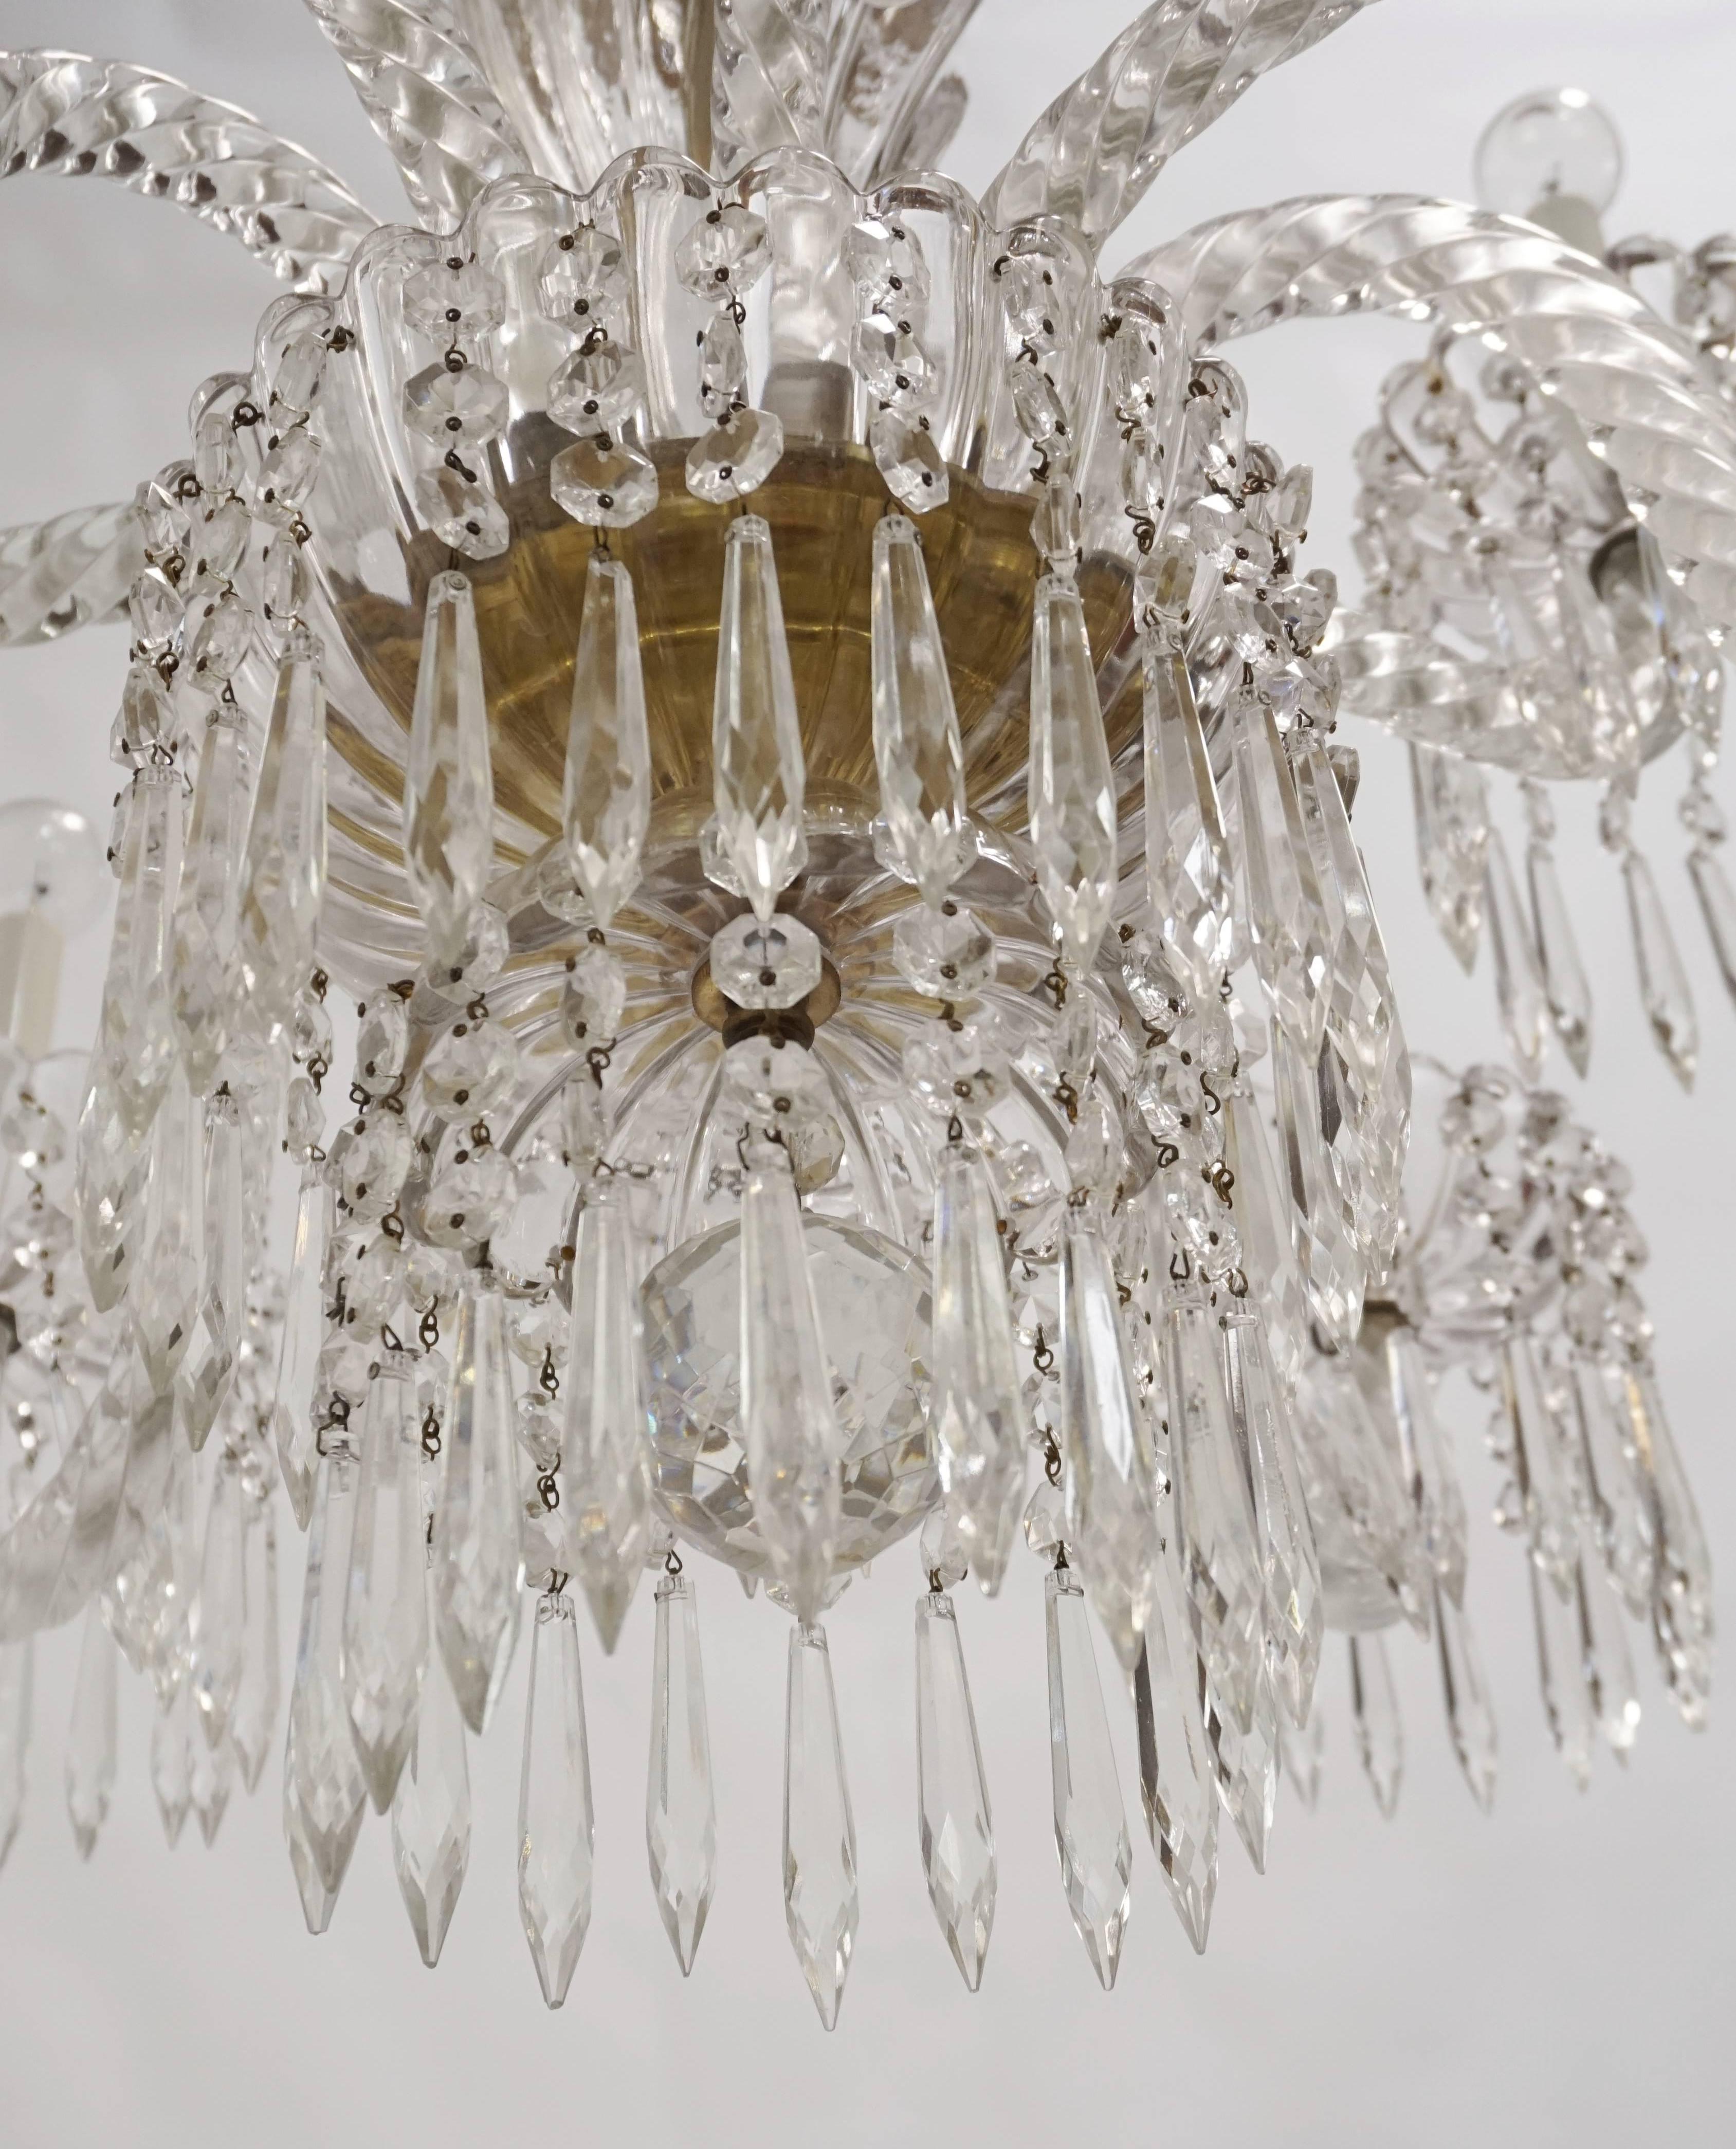 Mid-20th Century Antique Baccarat Undulating 10-Armed Crystal Waterfalls Chandelier